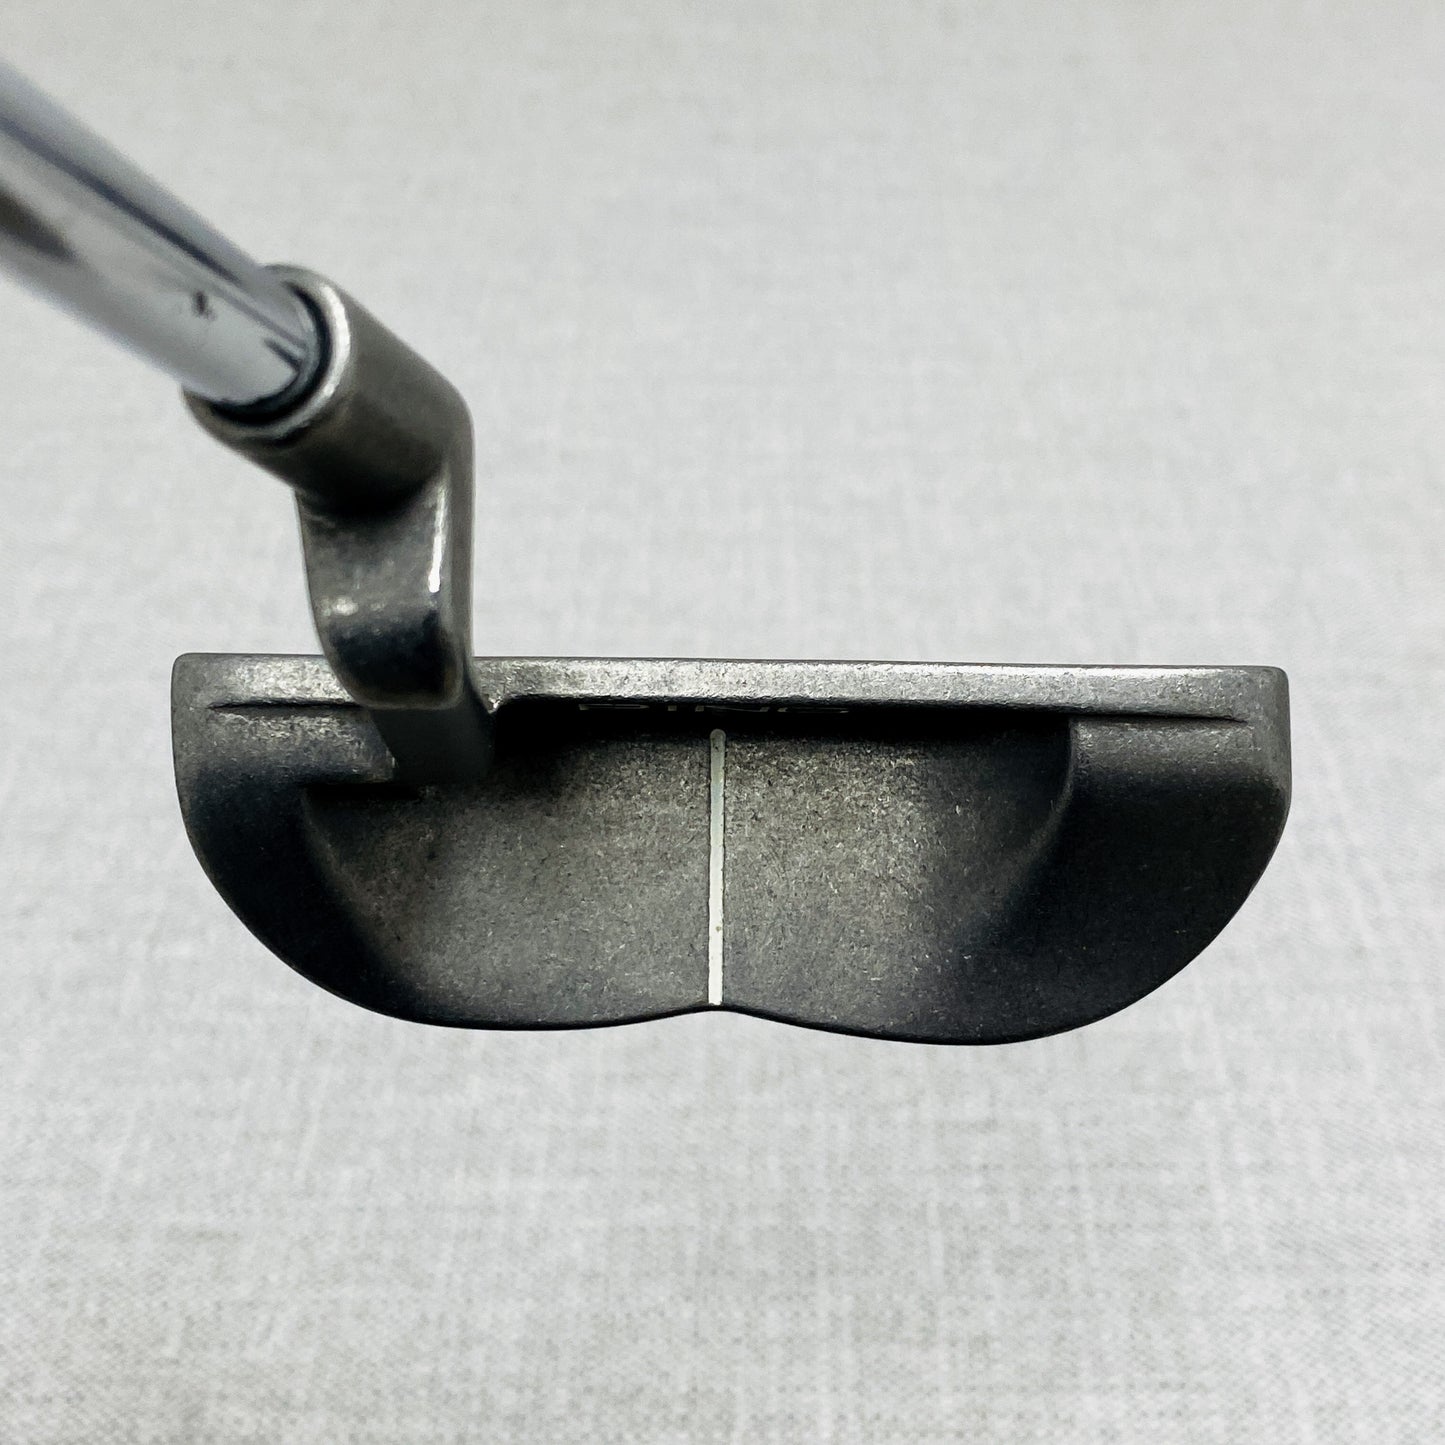 PING B60 Stainless Putter. 34 inch - Excellent Condition # T999